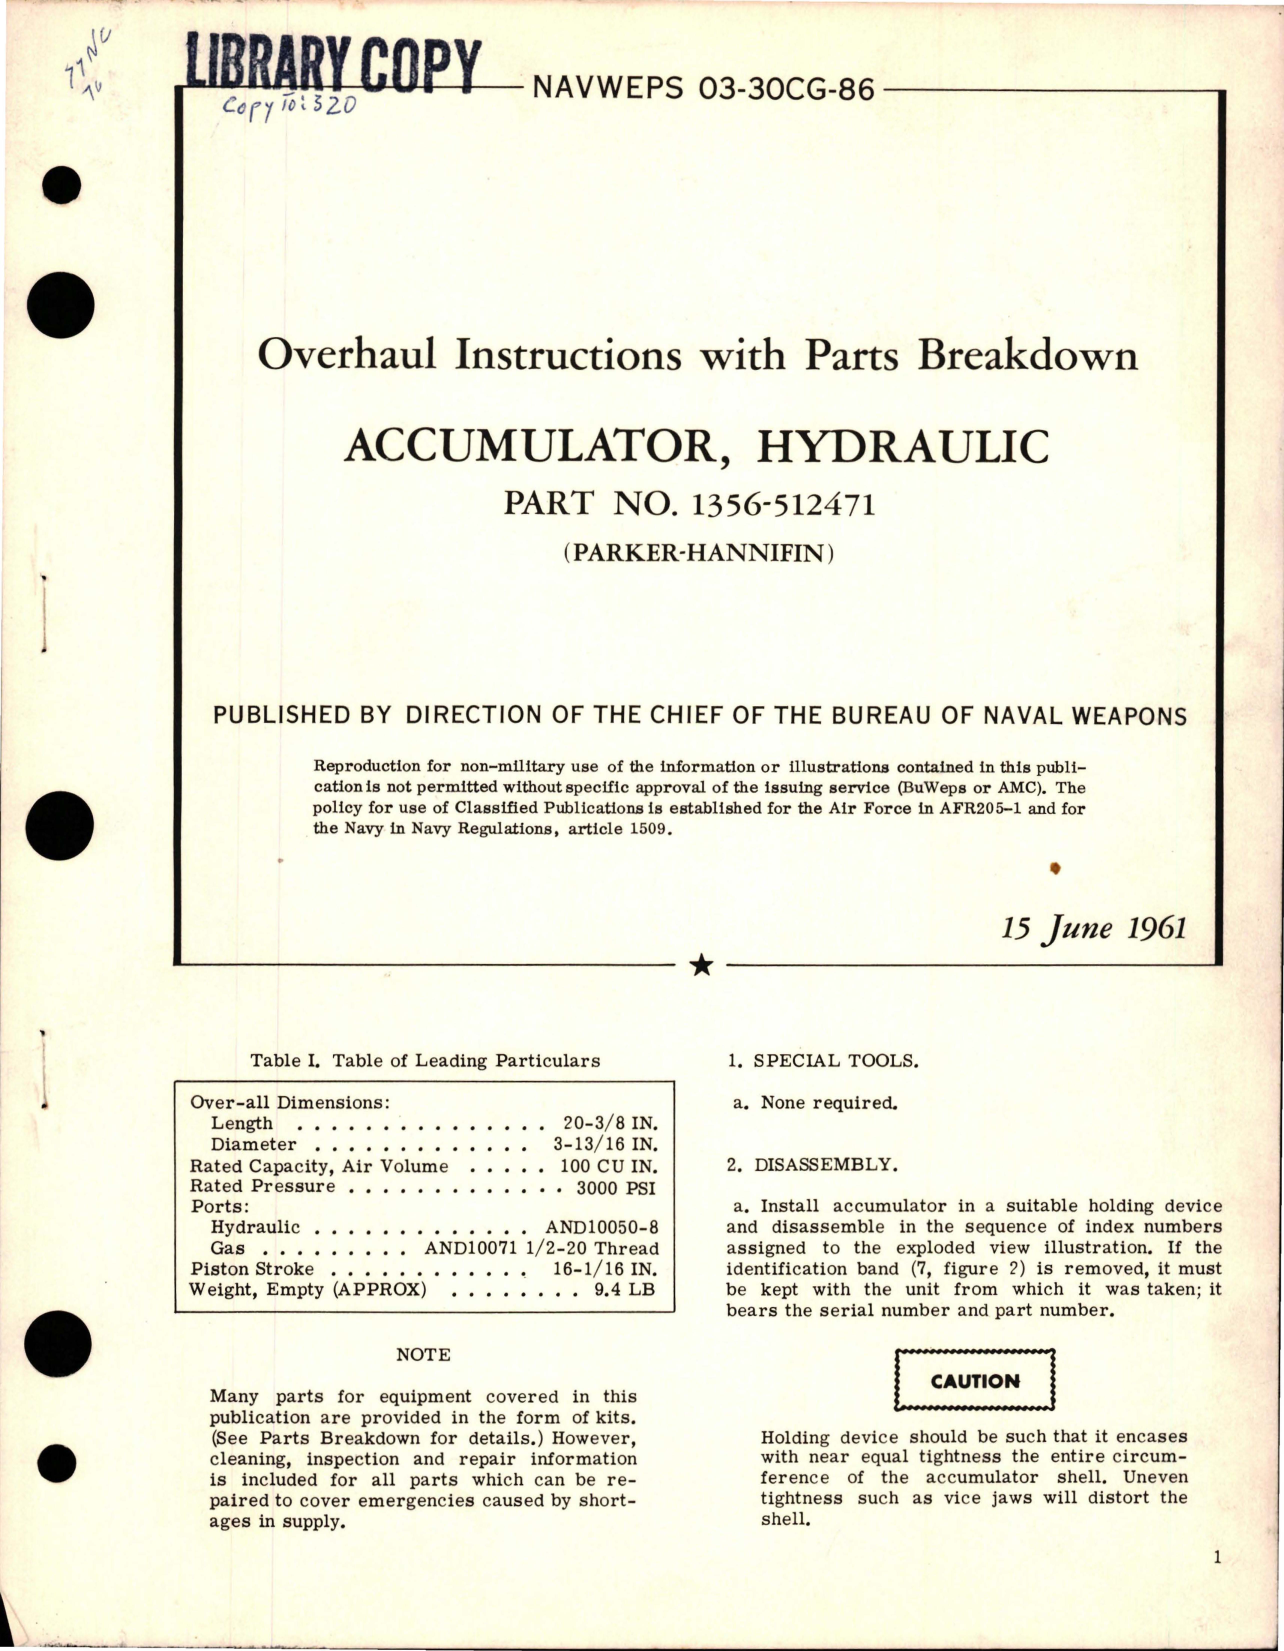 Sample page 1 from AirCorps Library document: Overhaul Instructions with Parts Breakdown for Hydraulic Accumulator - Part 1356-512471